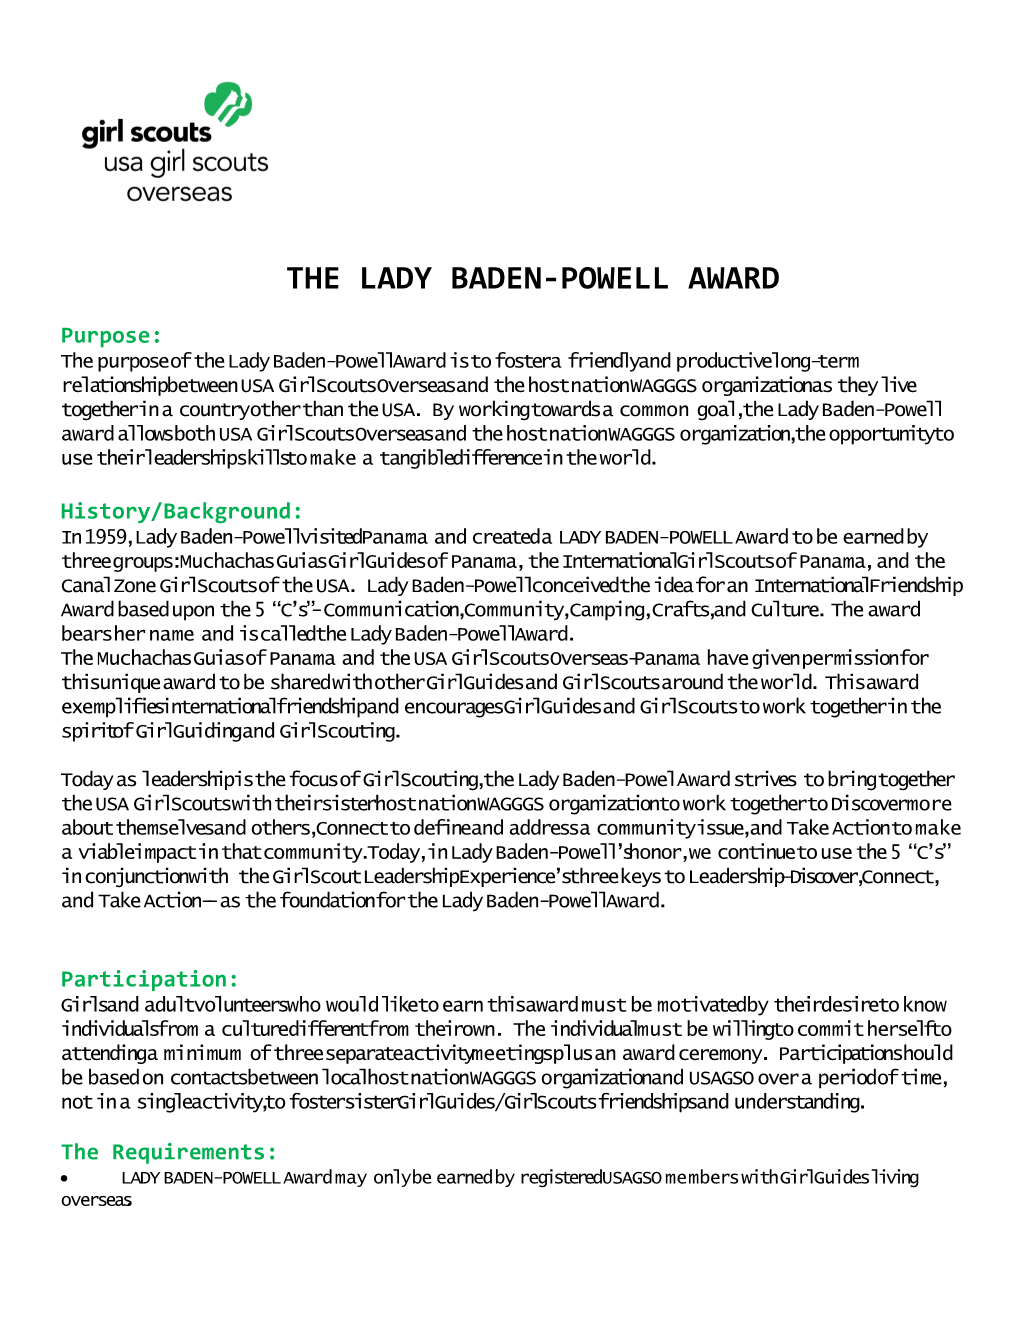 Guidelines for Earning the Lady Baden-Powell Award